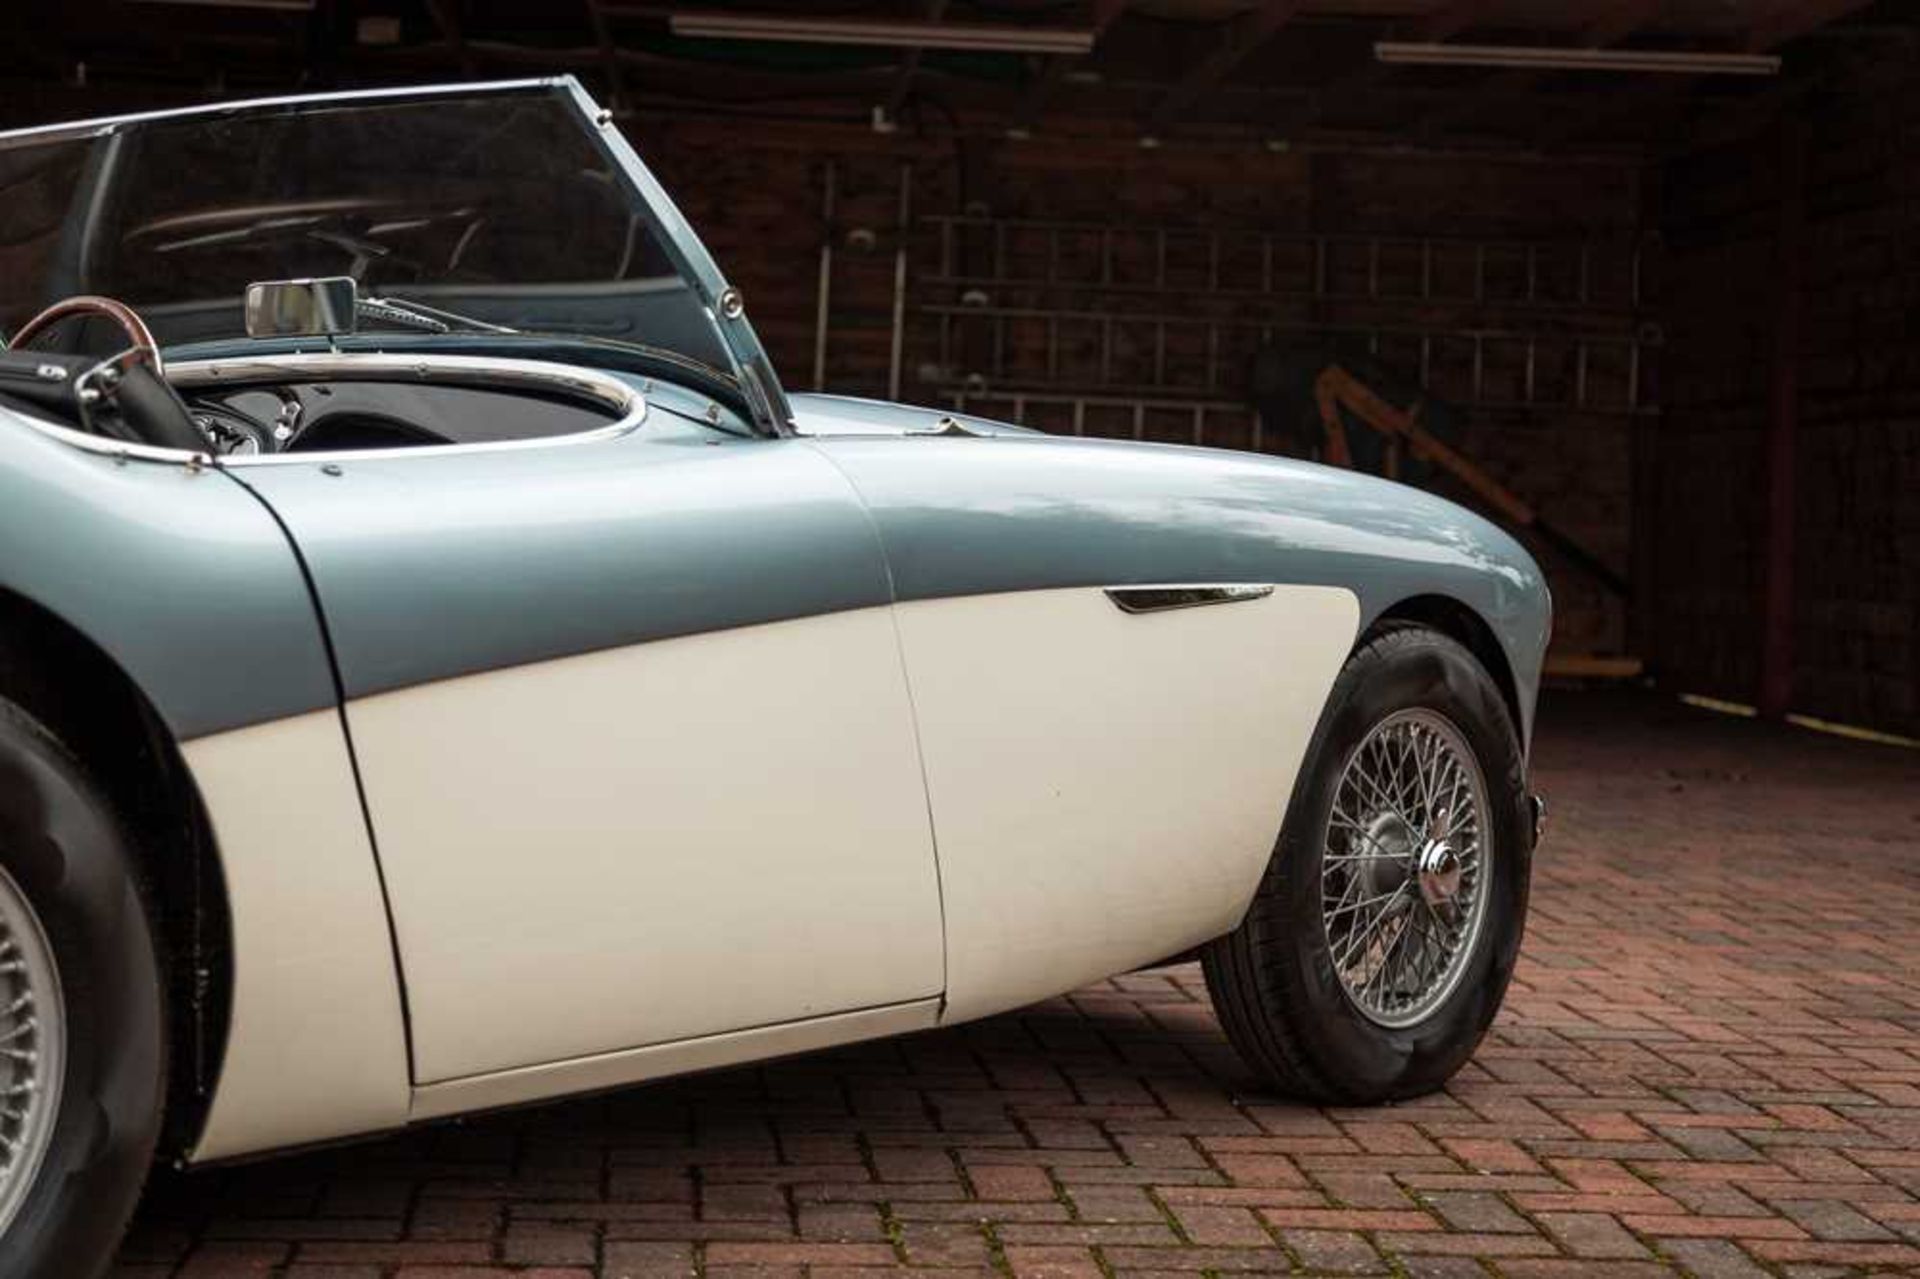 1955 Austin-Healey 100/4 Subtly Upgraded with 5-Speed Transmission and Front Disc Brakes - Image 22 of 54